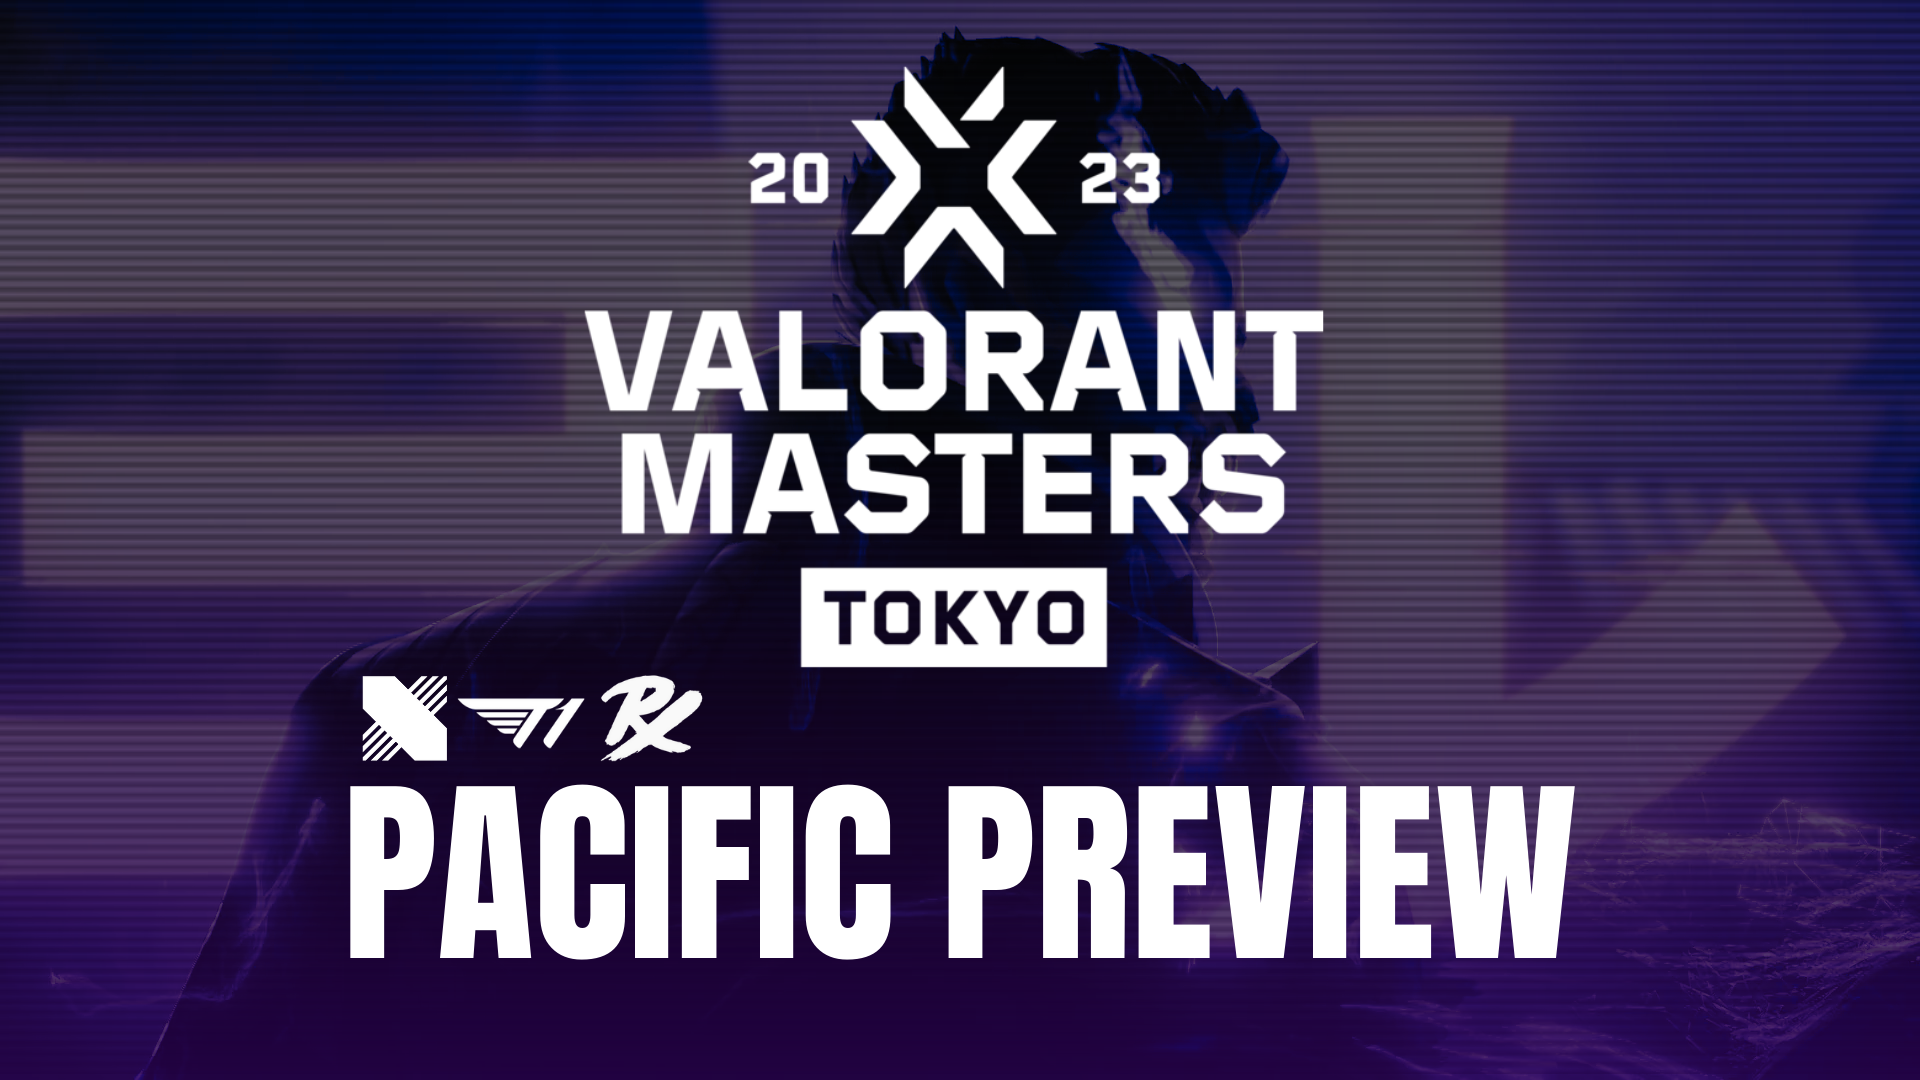 VCT Masters Tokyo Pacific Preview Valorant Tracker